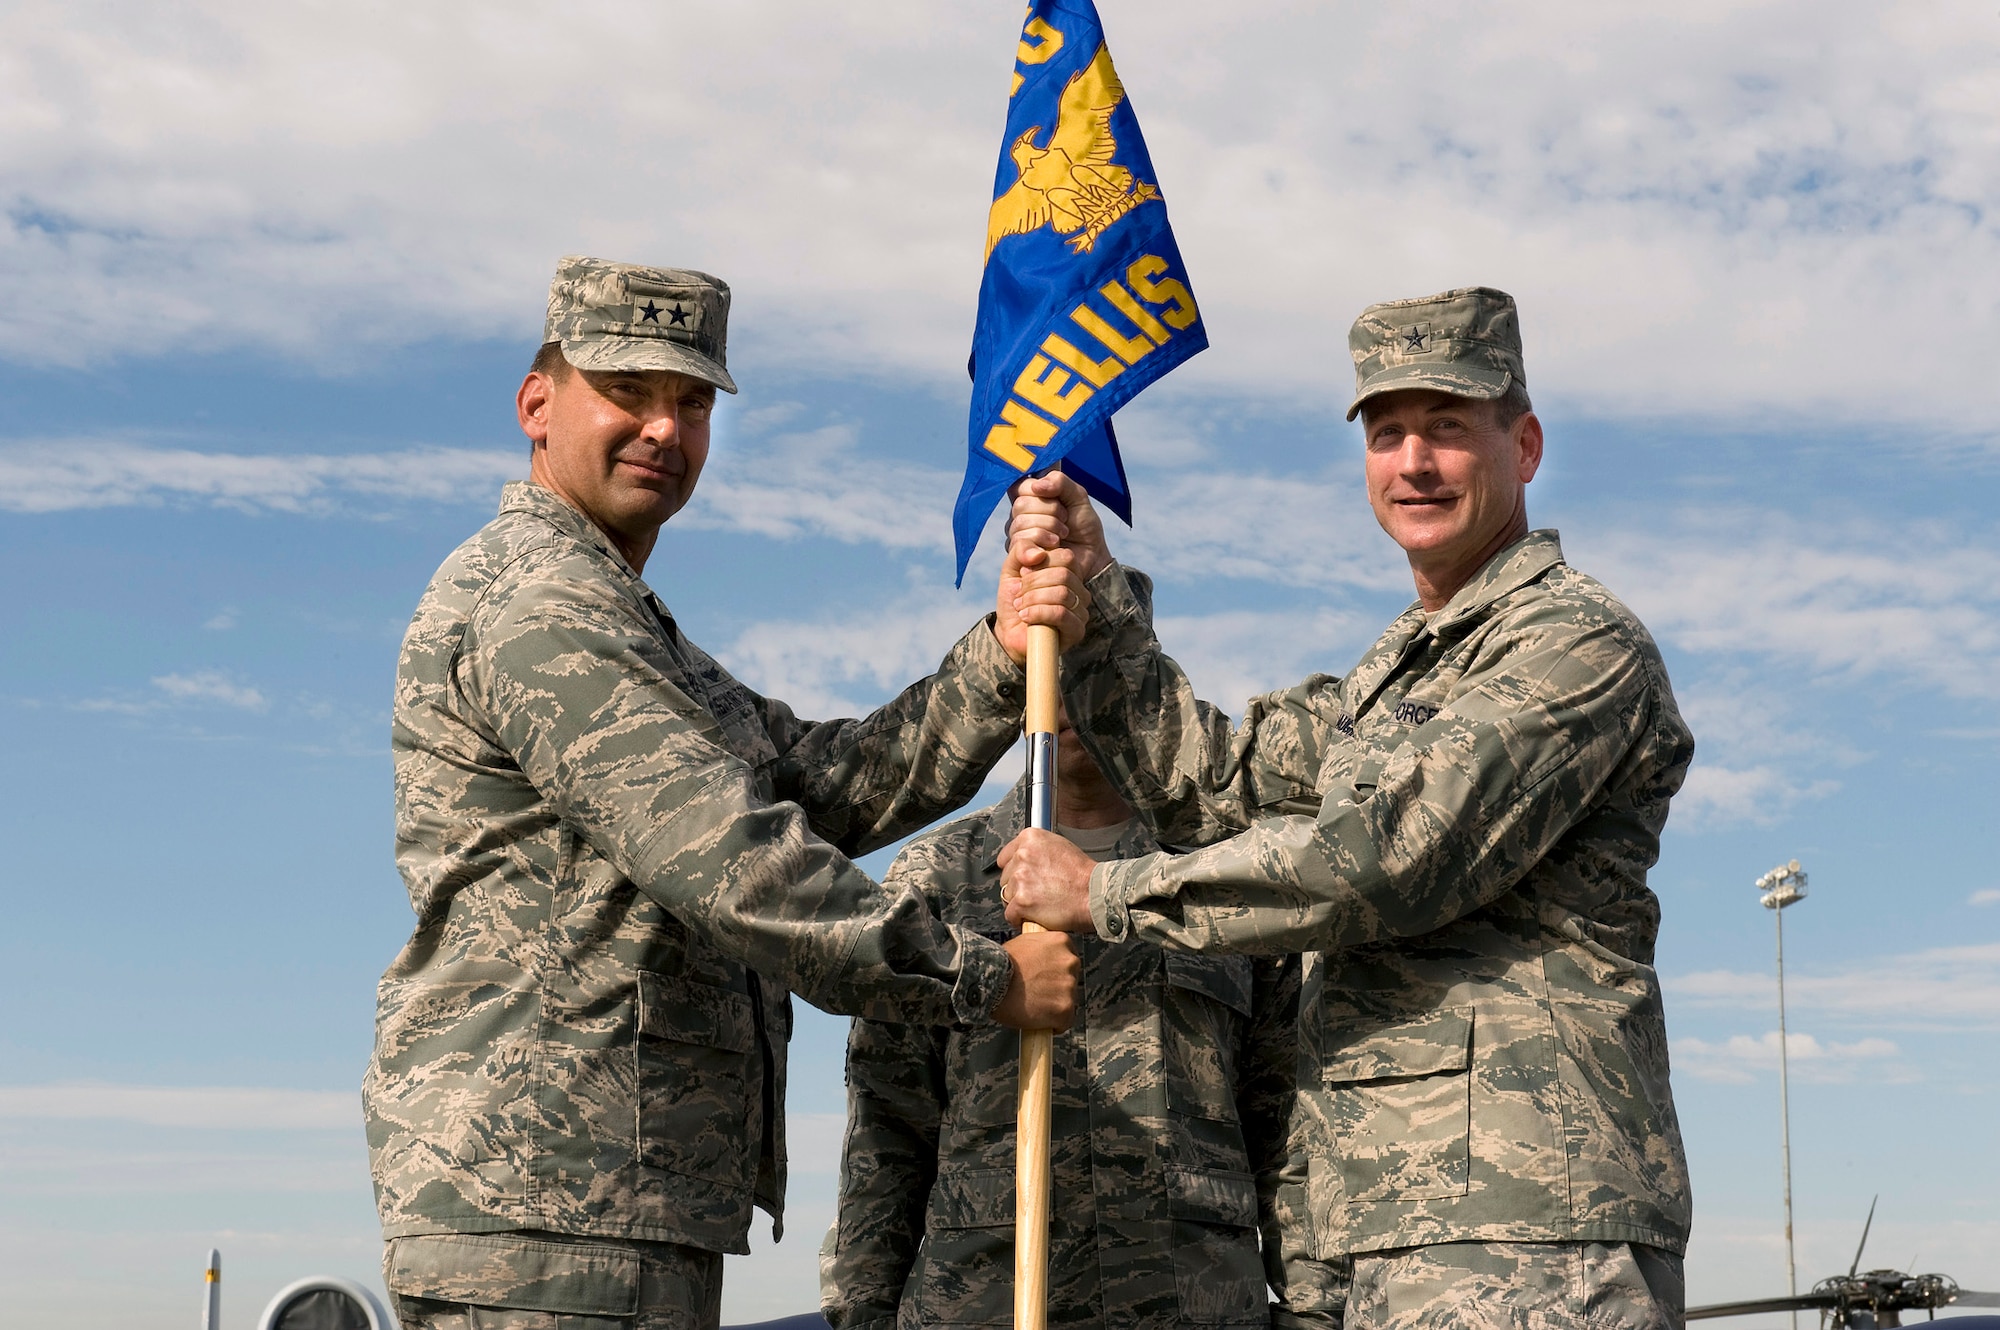 NELLIS AIR FORCE BASE, Nev.--  Maj. Gen. Ted Kresge, U.S. Air Force Warfare Center commander, passes the 57th Wing guidon to Brig. Gen. Terrence O'Shaughnessy, the new 57th Wing commander, at a change of command ceremony July 16. The 57th Wing is responsible for 38 squadrons at 12 installations, constituting the Air Force's most diverse flying wing, flying and maintaining more than 130 aircraft. The 57th Wing also oversees the U.S. Air Force Weapons School; U.S. Air Force Air Demonstration Squadron, the Thunderbirds; and the Red Flag and Green Flag exercises. (U.S. Air Force Photo by Airman 1st Class Brett Clashman)